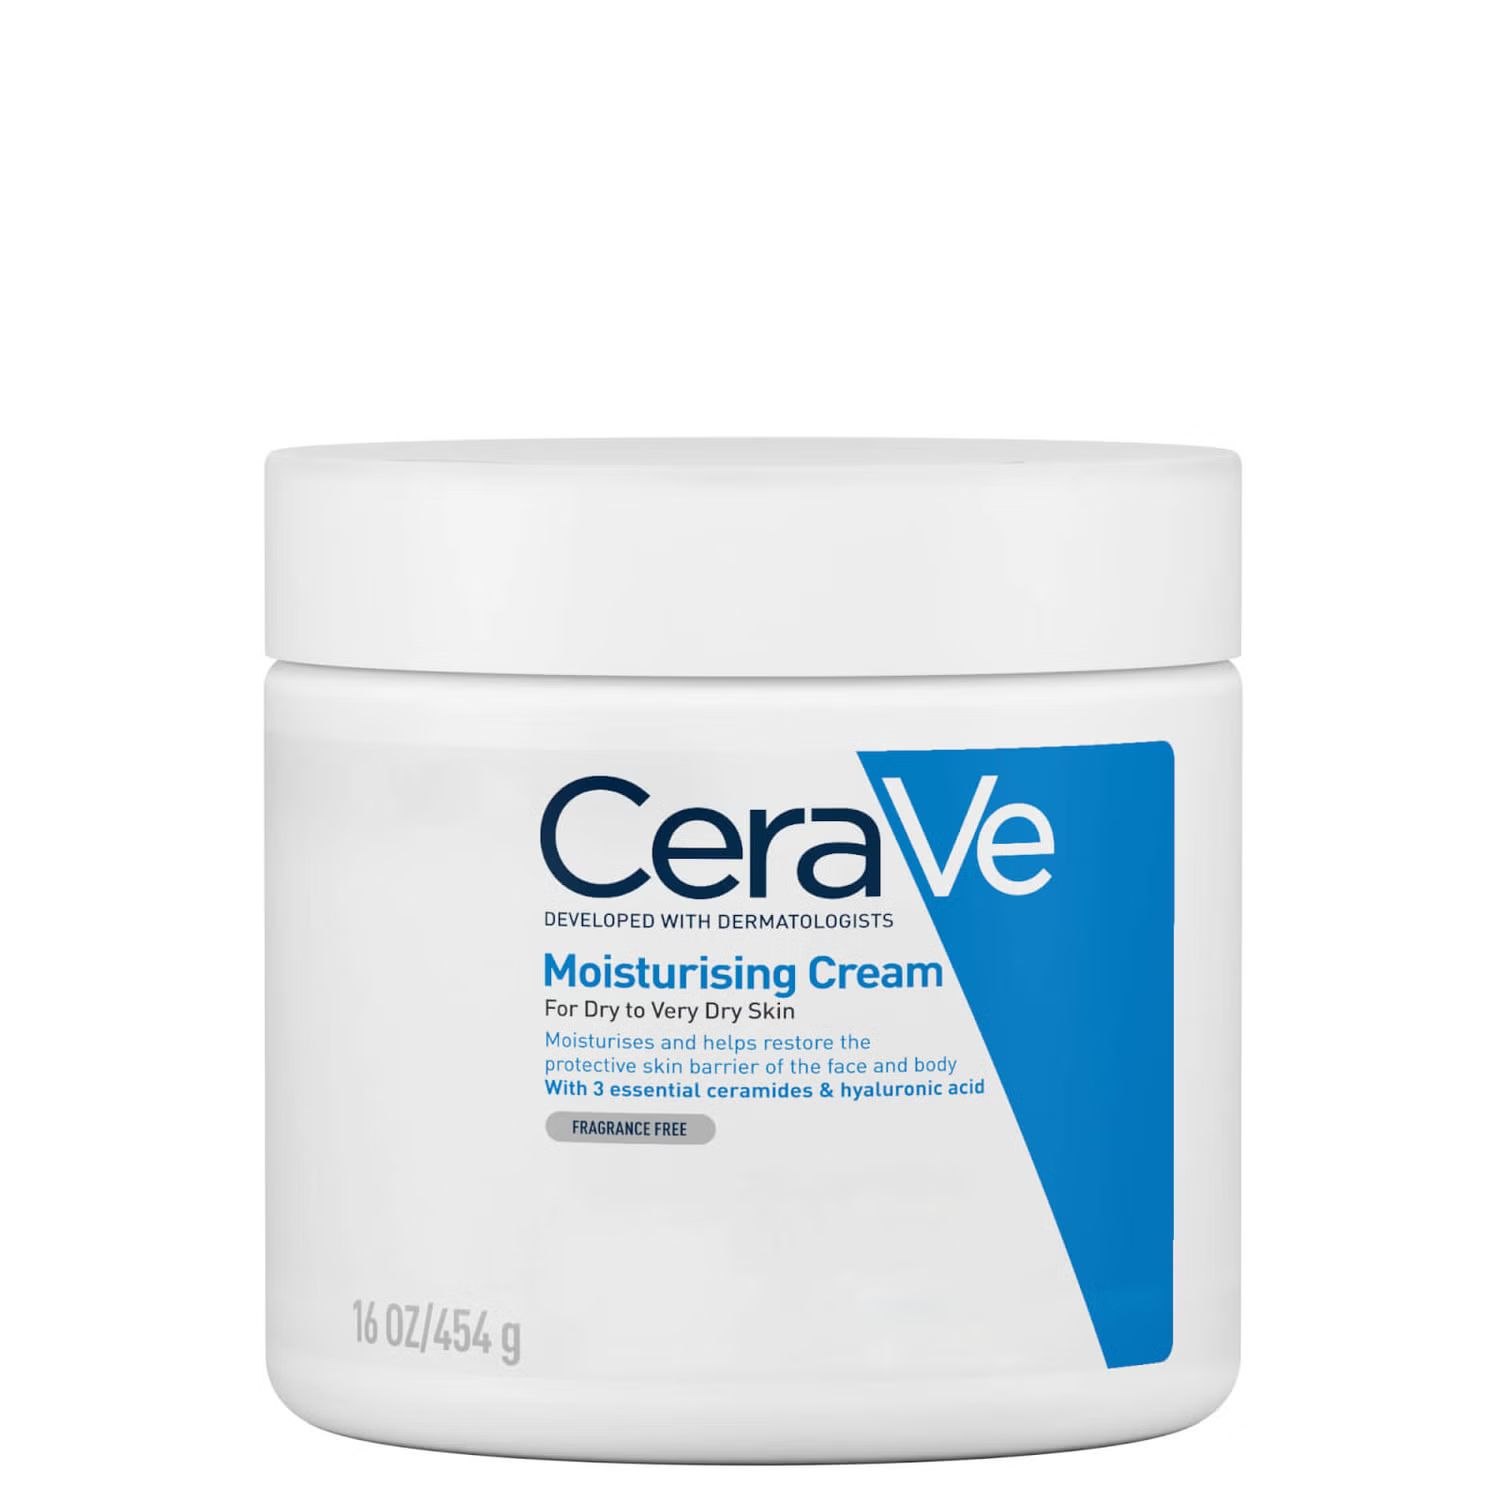 CeraVe Moisturising Cream Pot with Ceramides for Dry to Very Dry Skin 454g | Look Fantastic (UK)